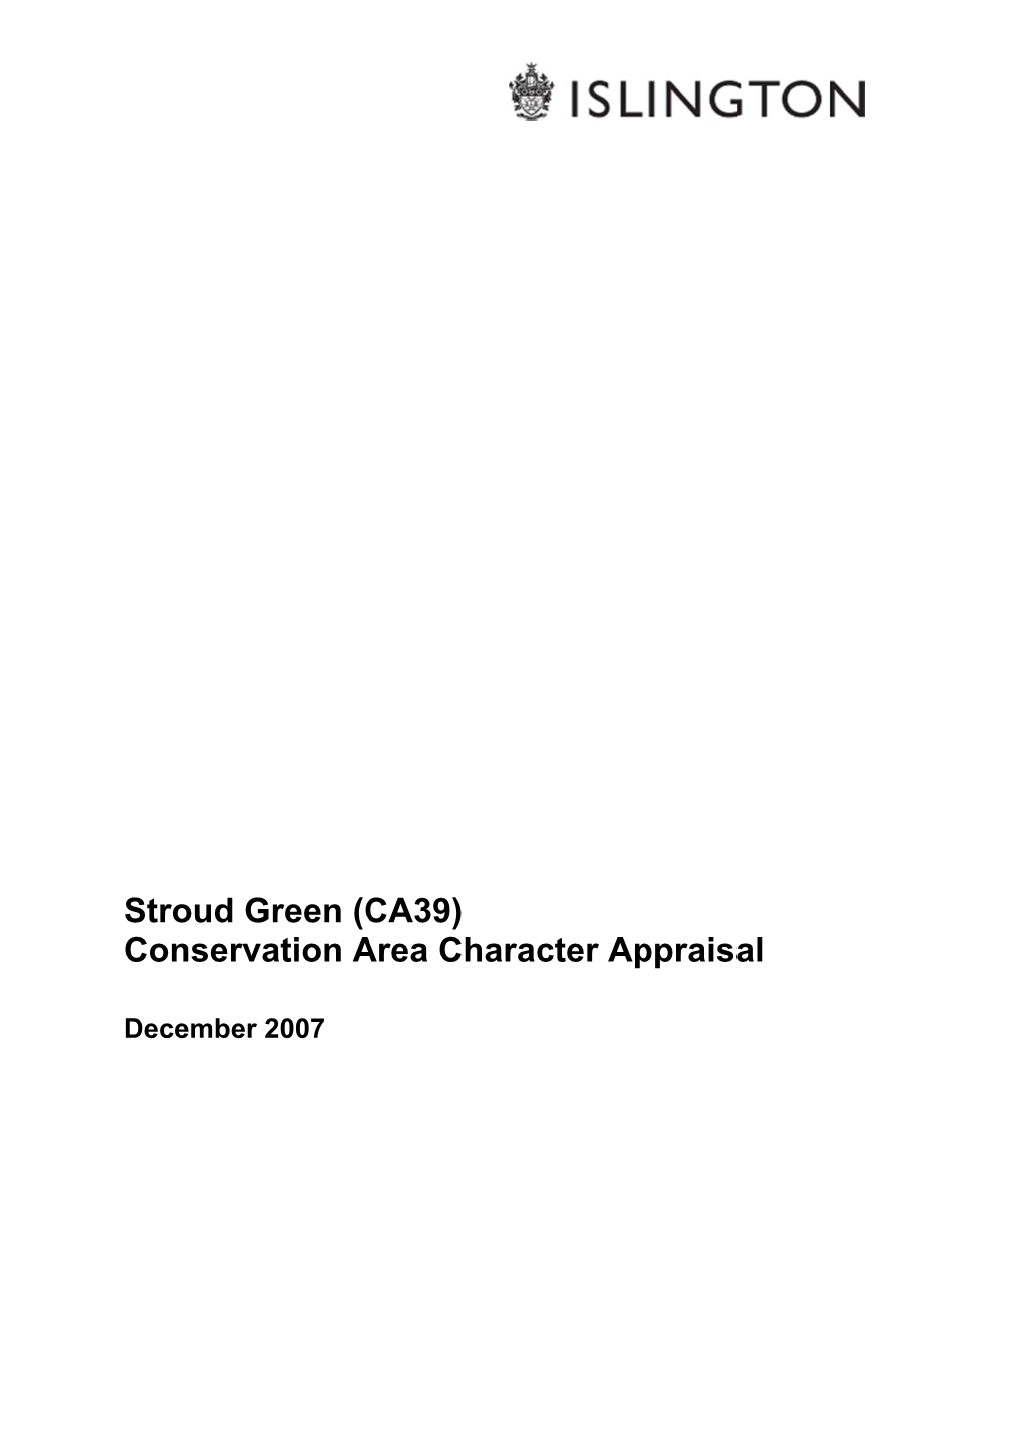 Stro Con Oud Gr Nserva Reen (C Ation a CA39) Area C ) Character Appraisal